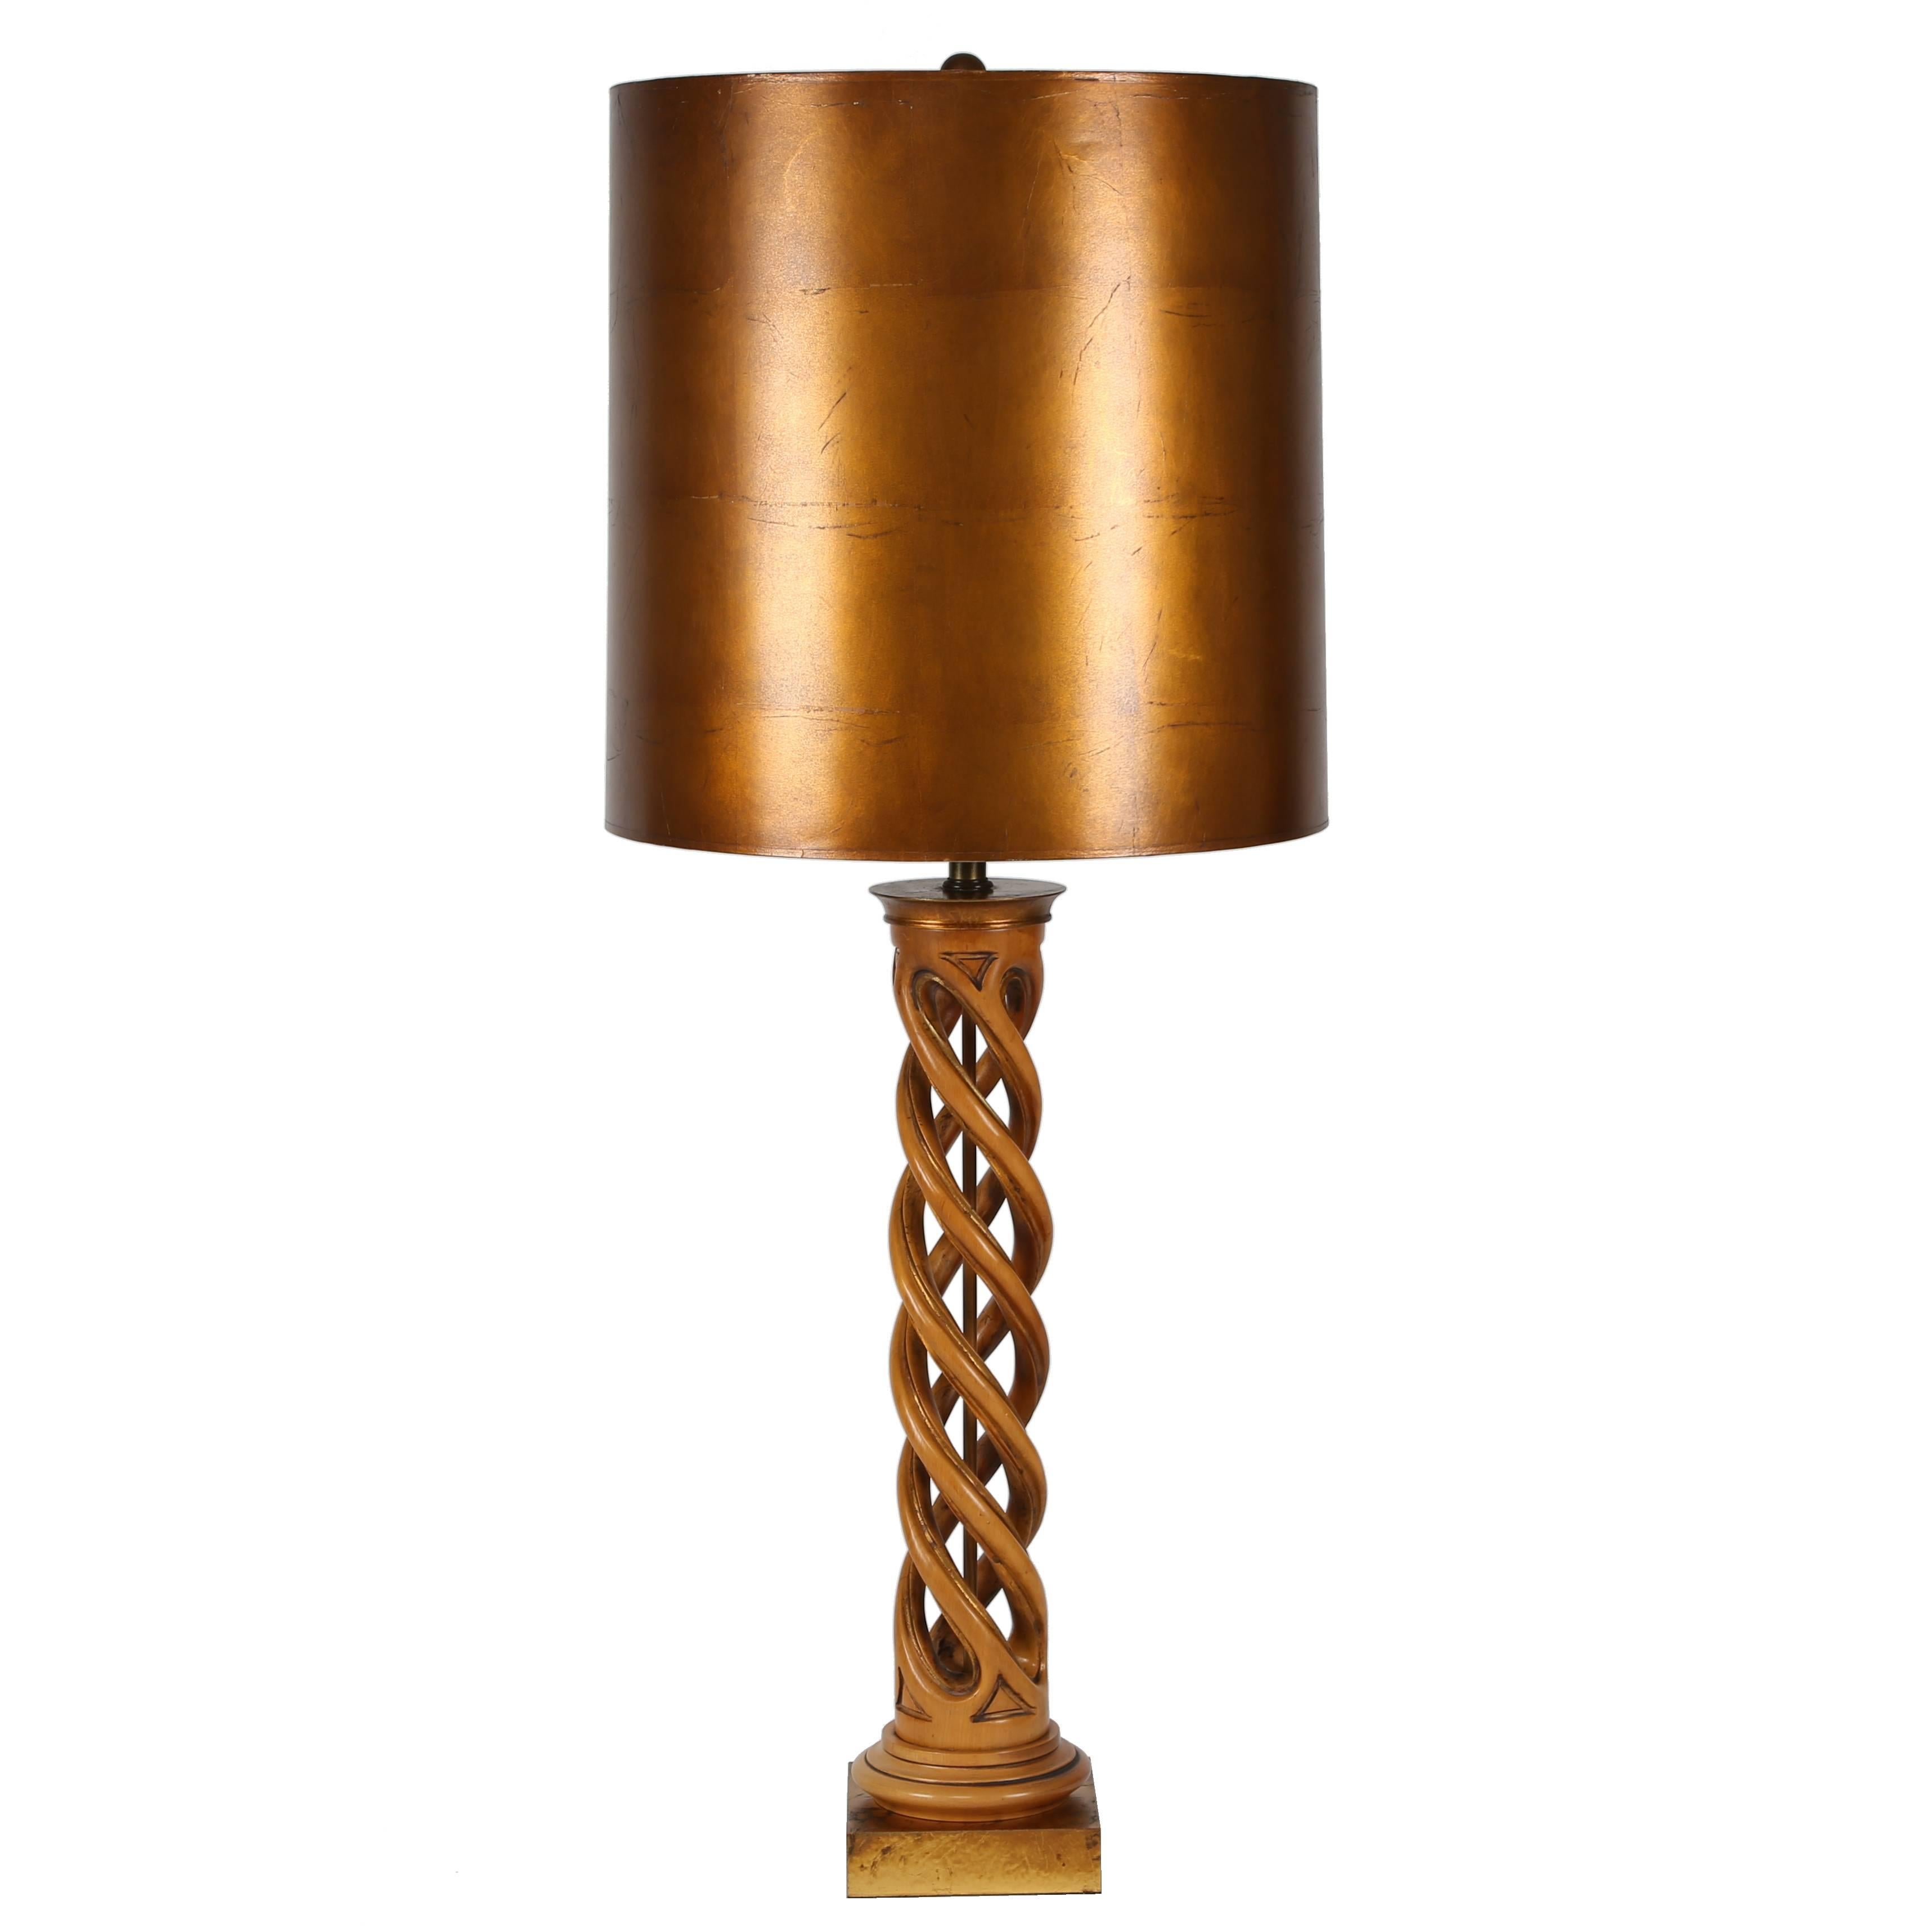 Frederick Cooper Studios Carved Helix Table Lamp, Circa 1950s For Sale